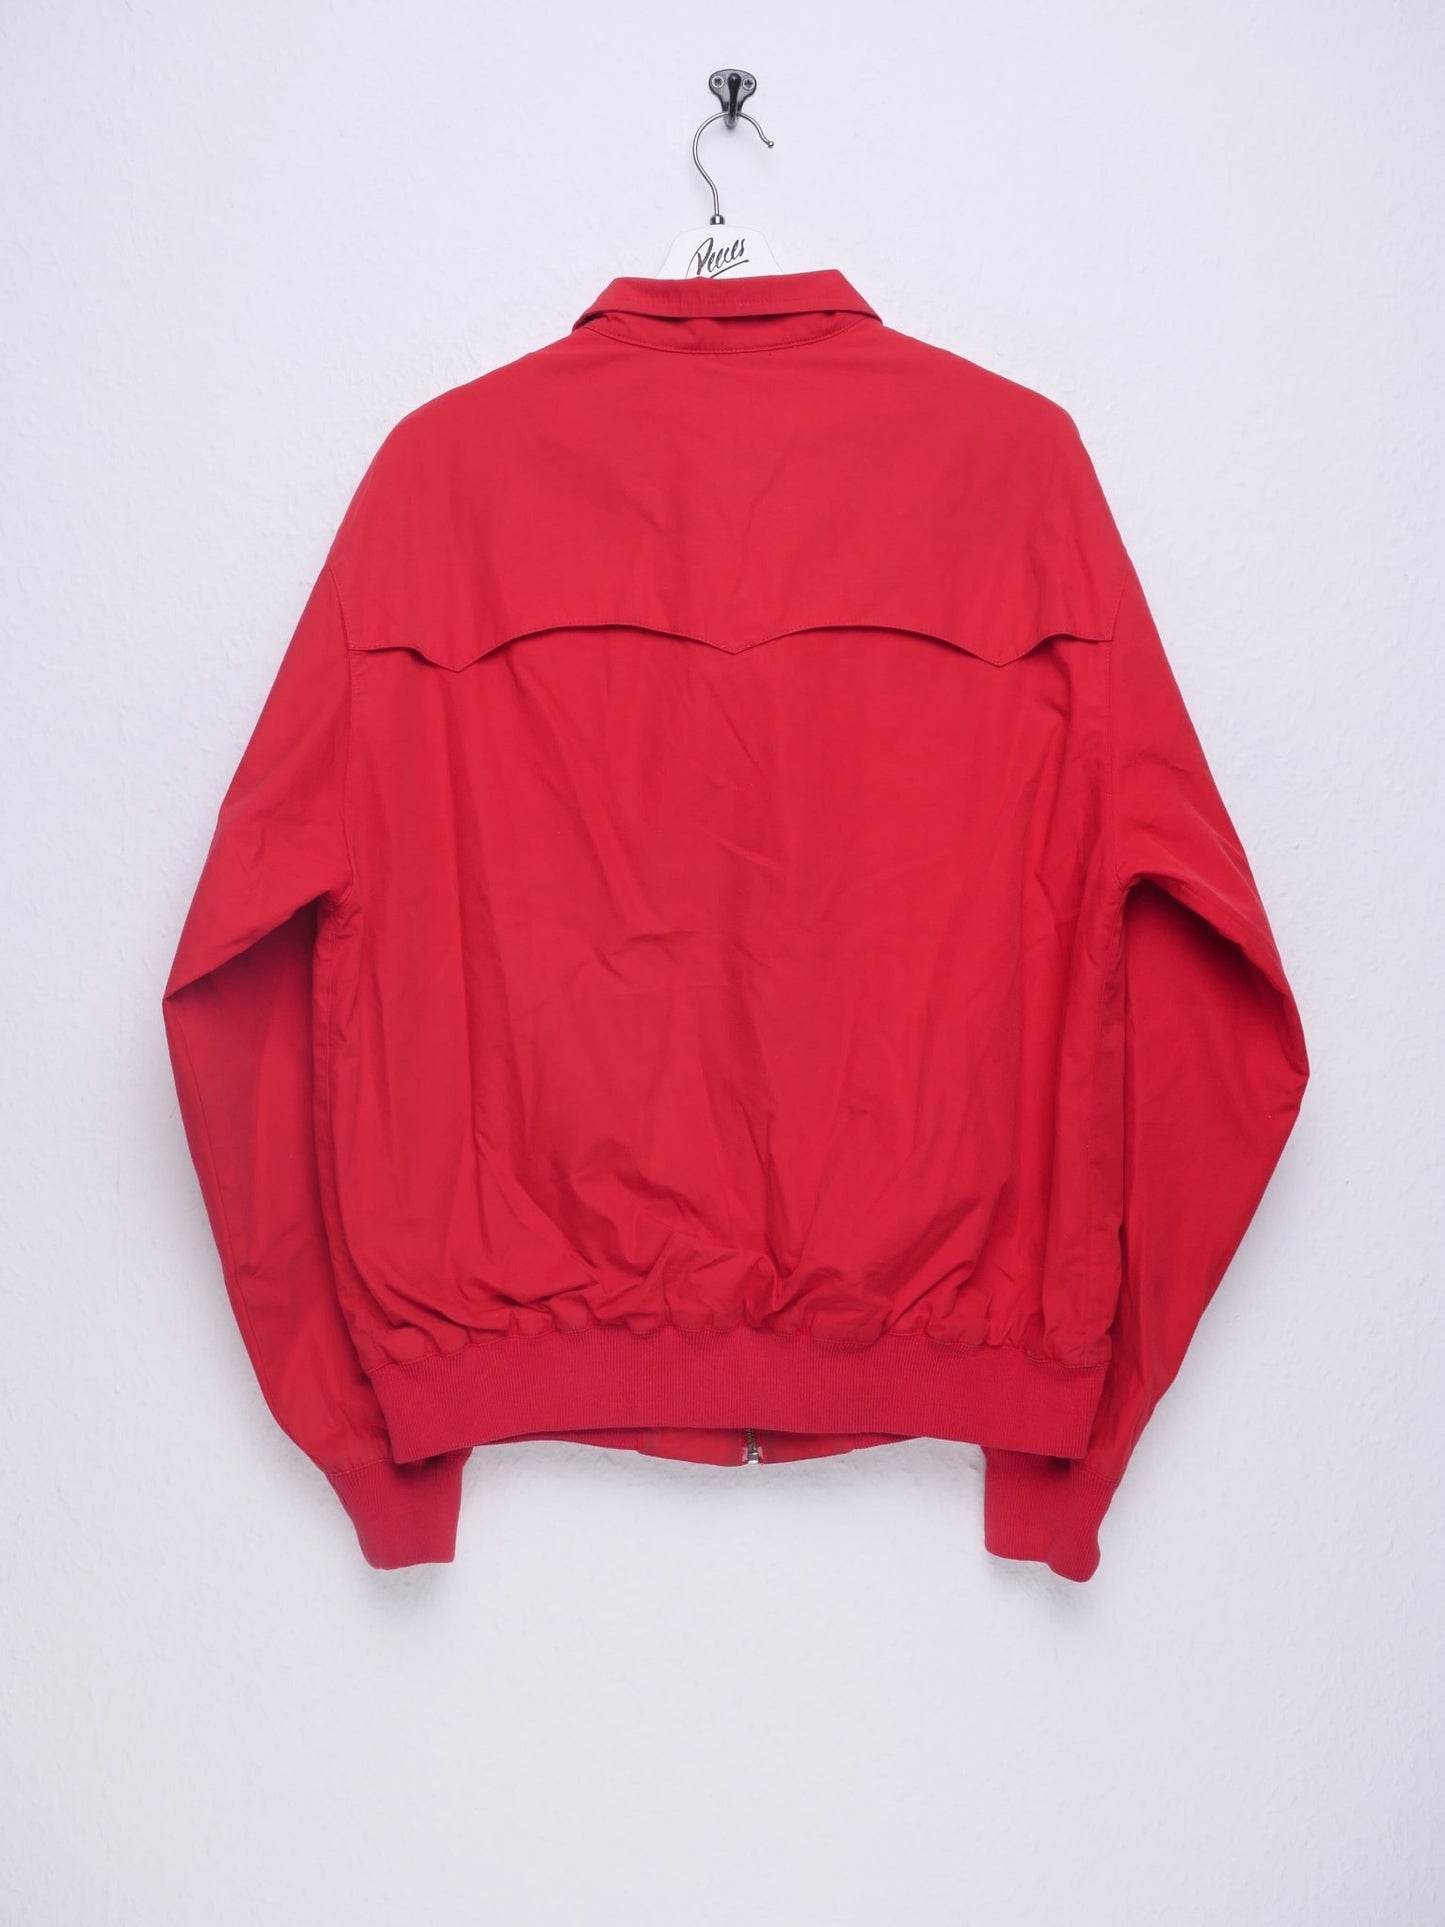 Fred Perry embroidered Logo red Jacke - Peeces